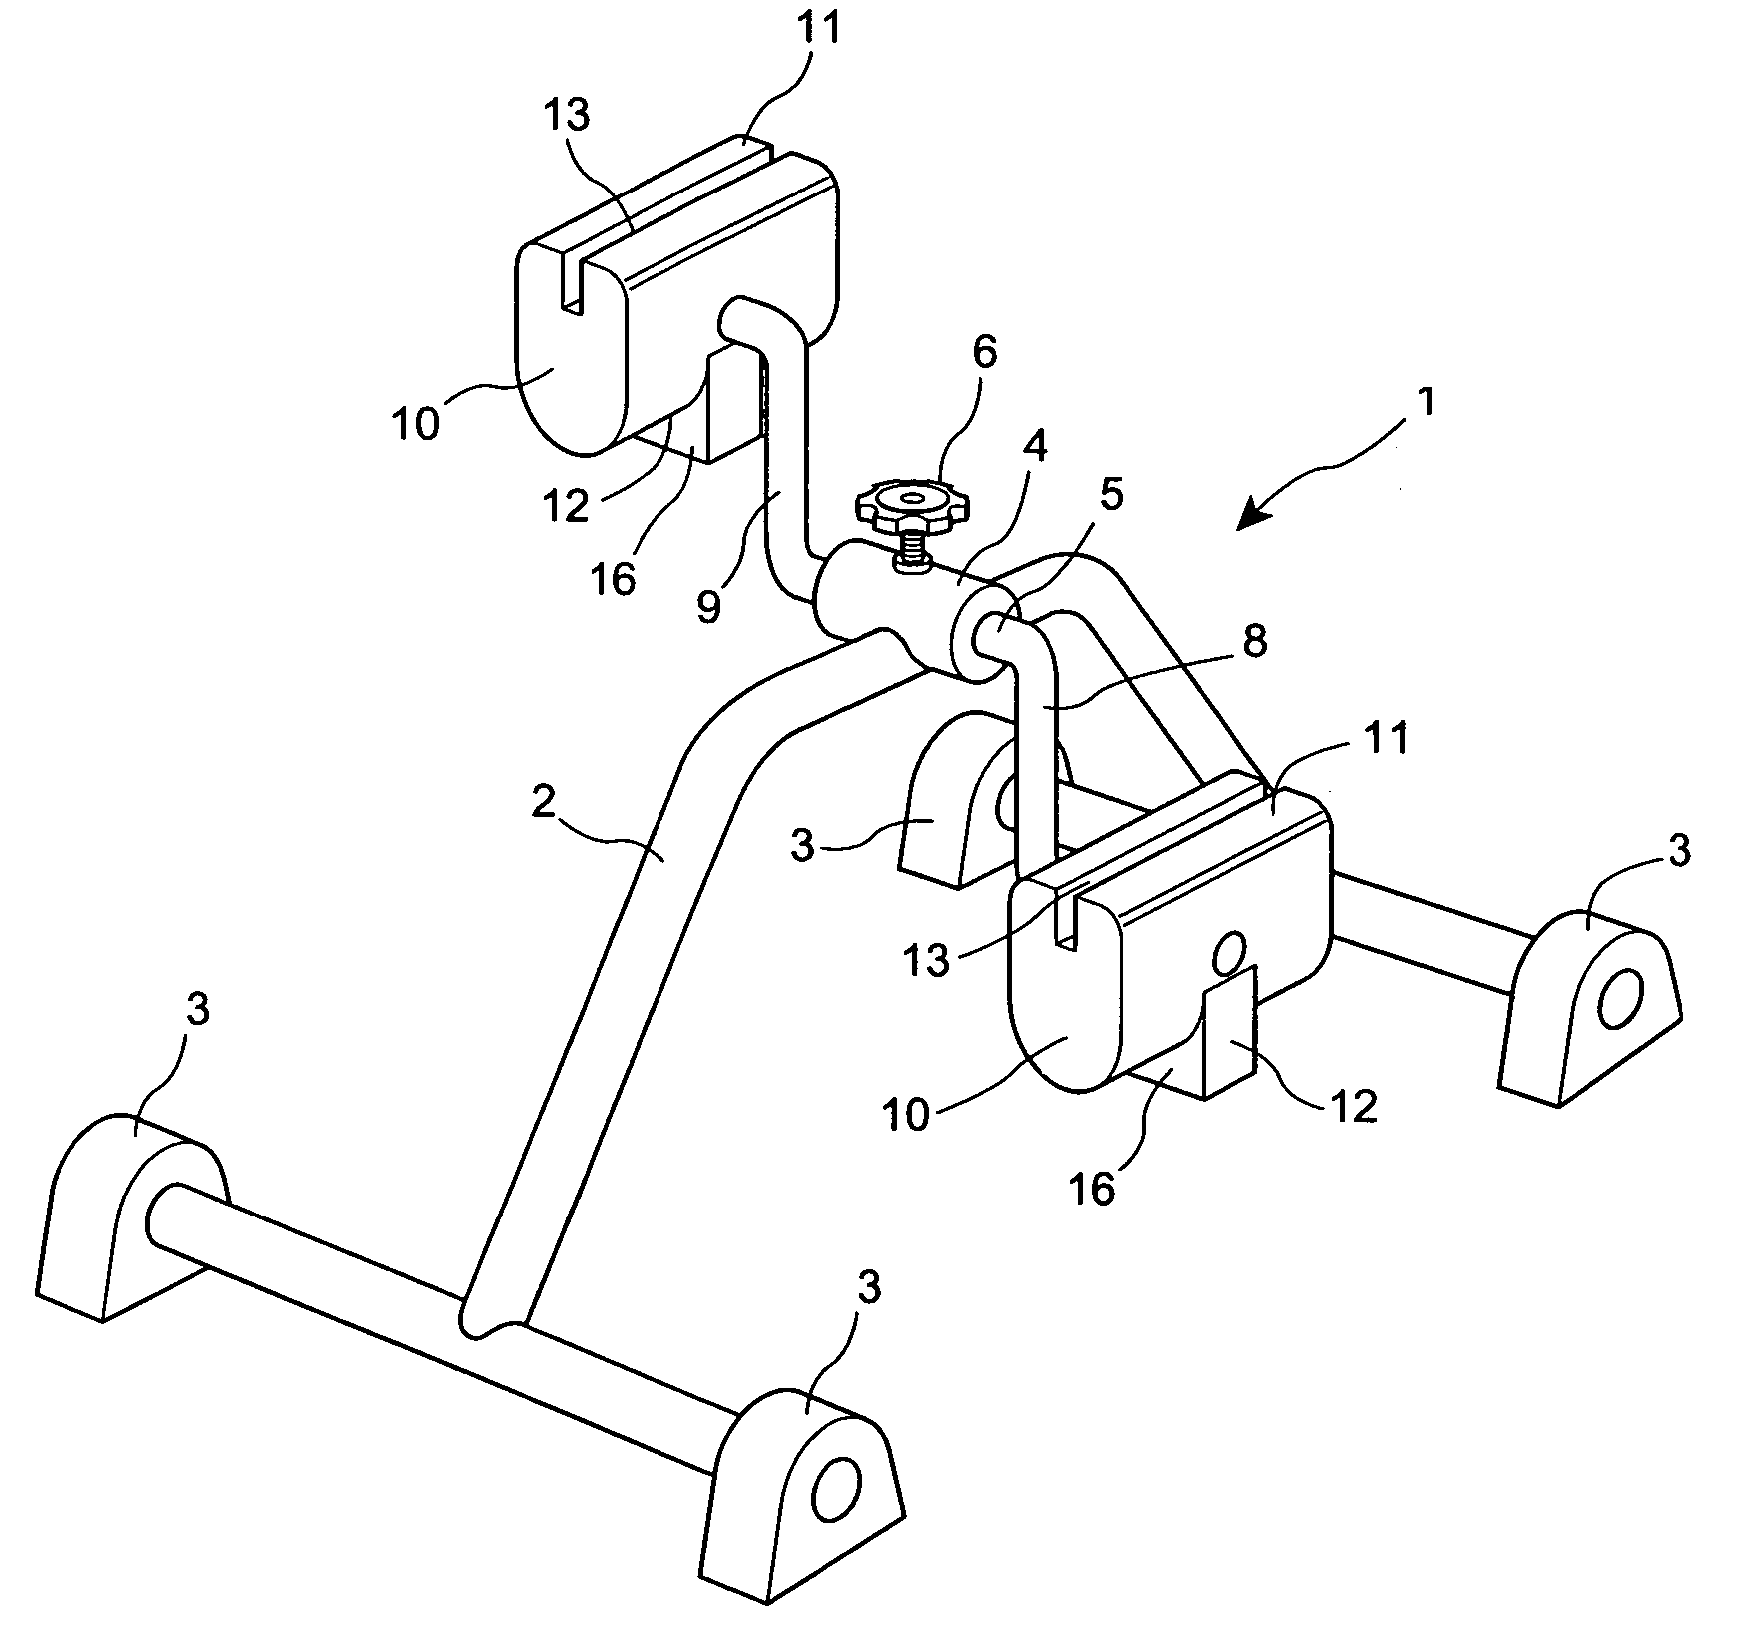 Portable exercise device and method of preventing lactic-acid build-up